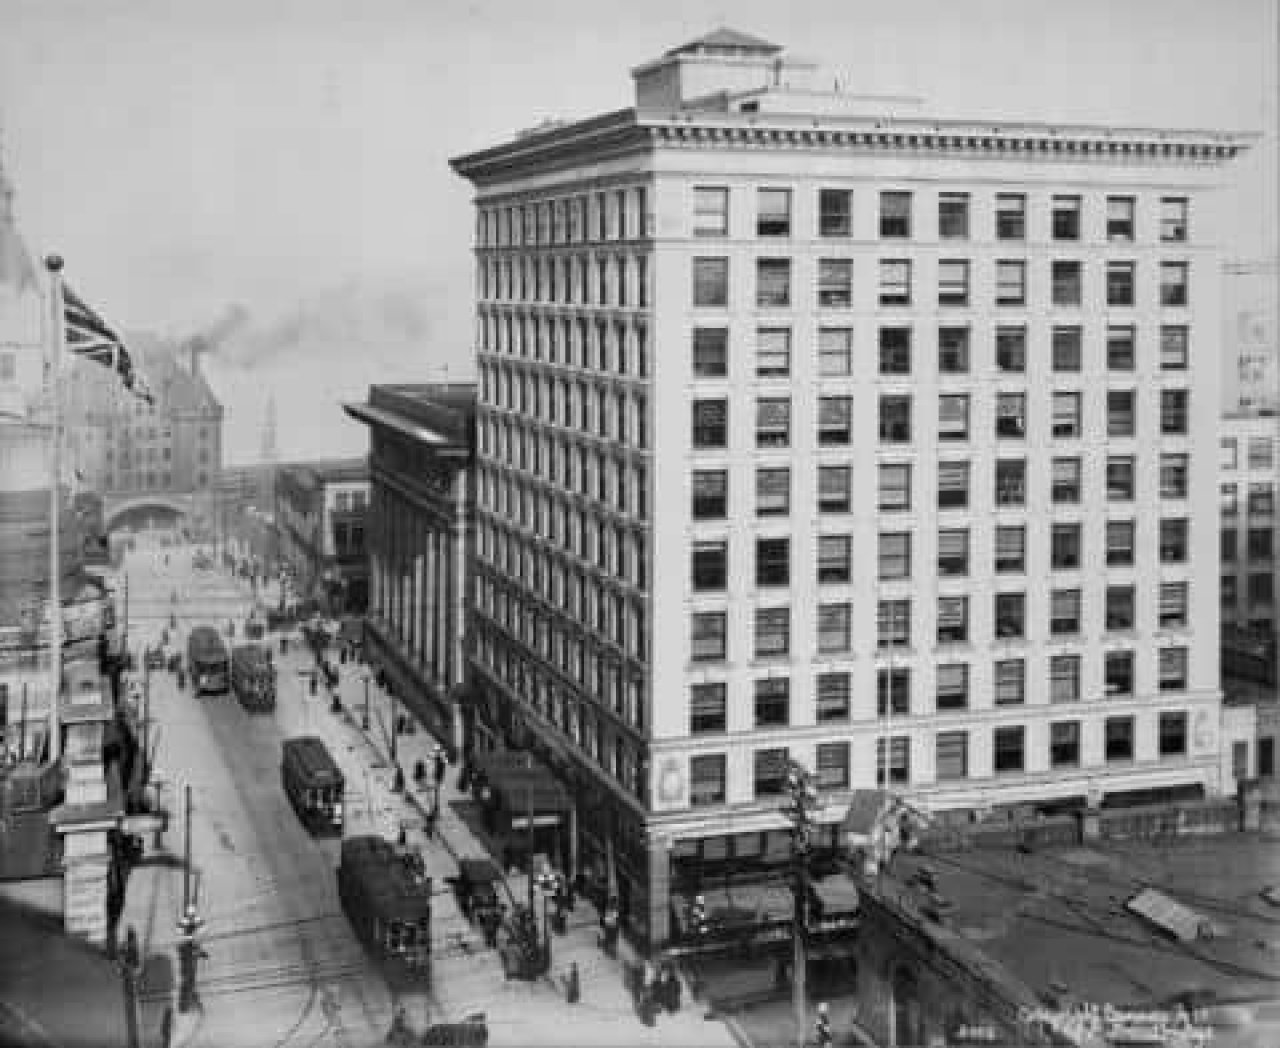 Rogers Building on right, 1913. City of Vancouver Archives. Source: City of Vancouver Archives 220-04